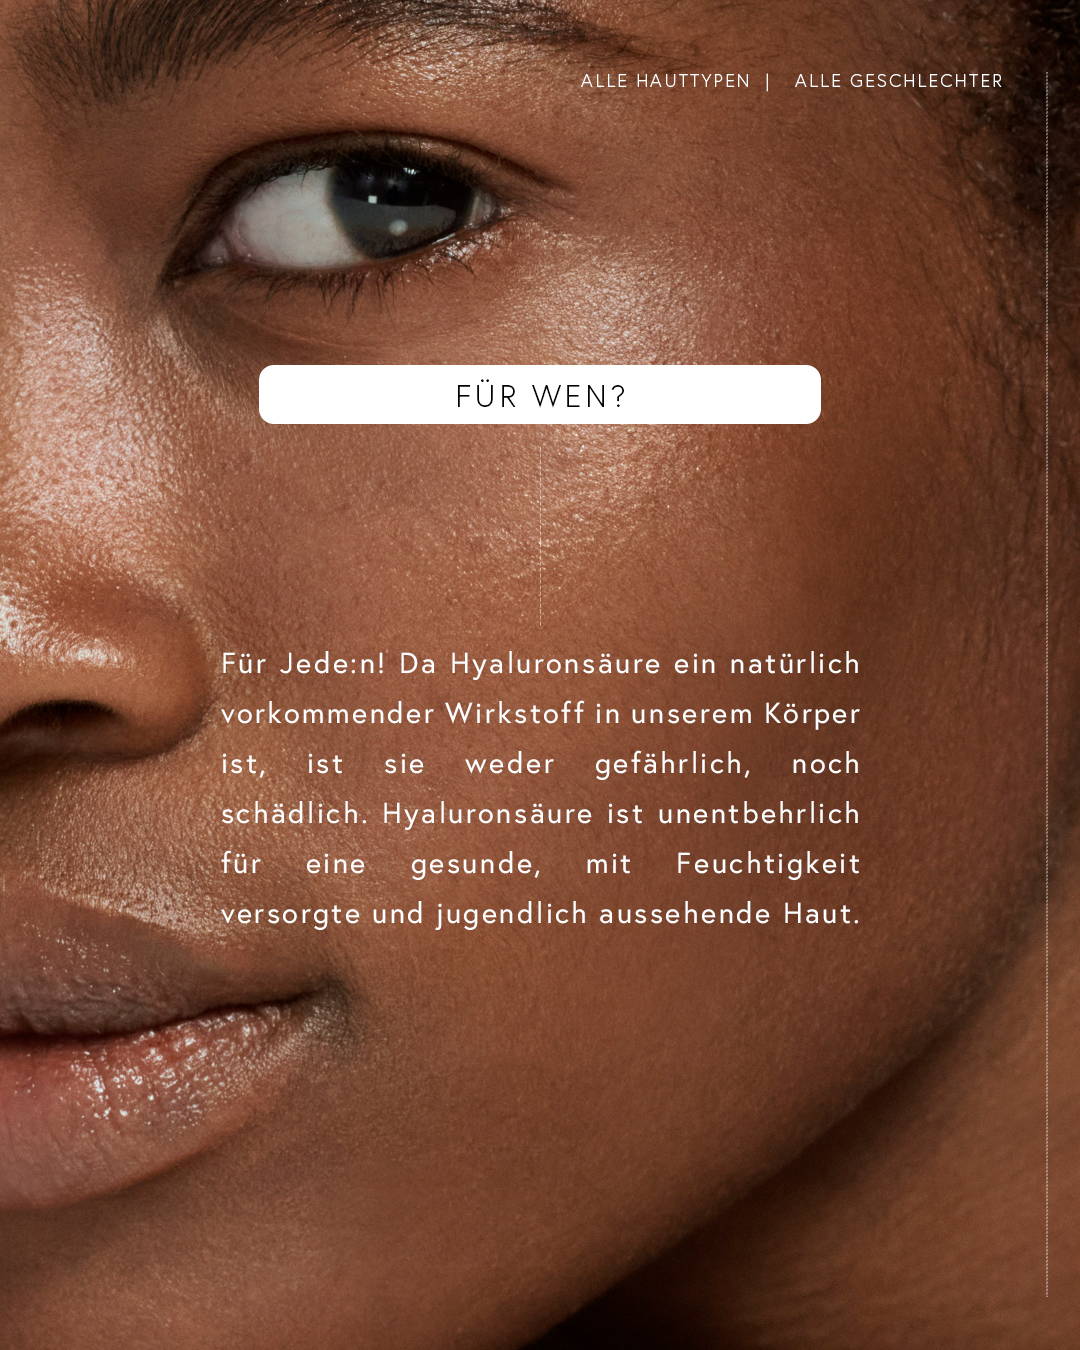 who is hyaluronic best for?